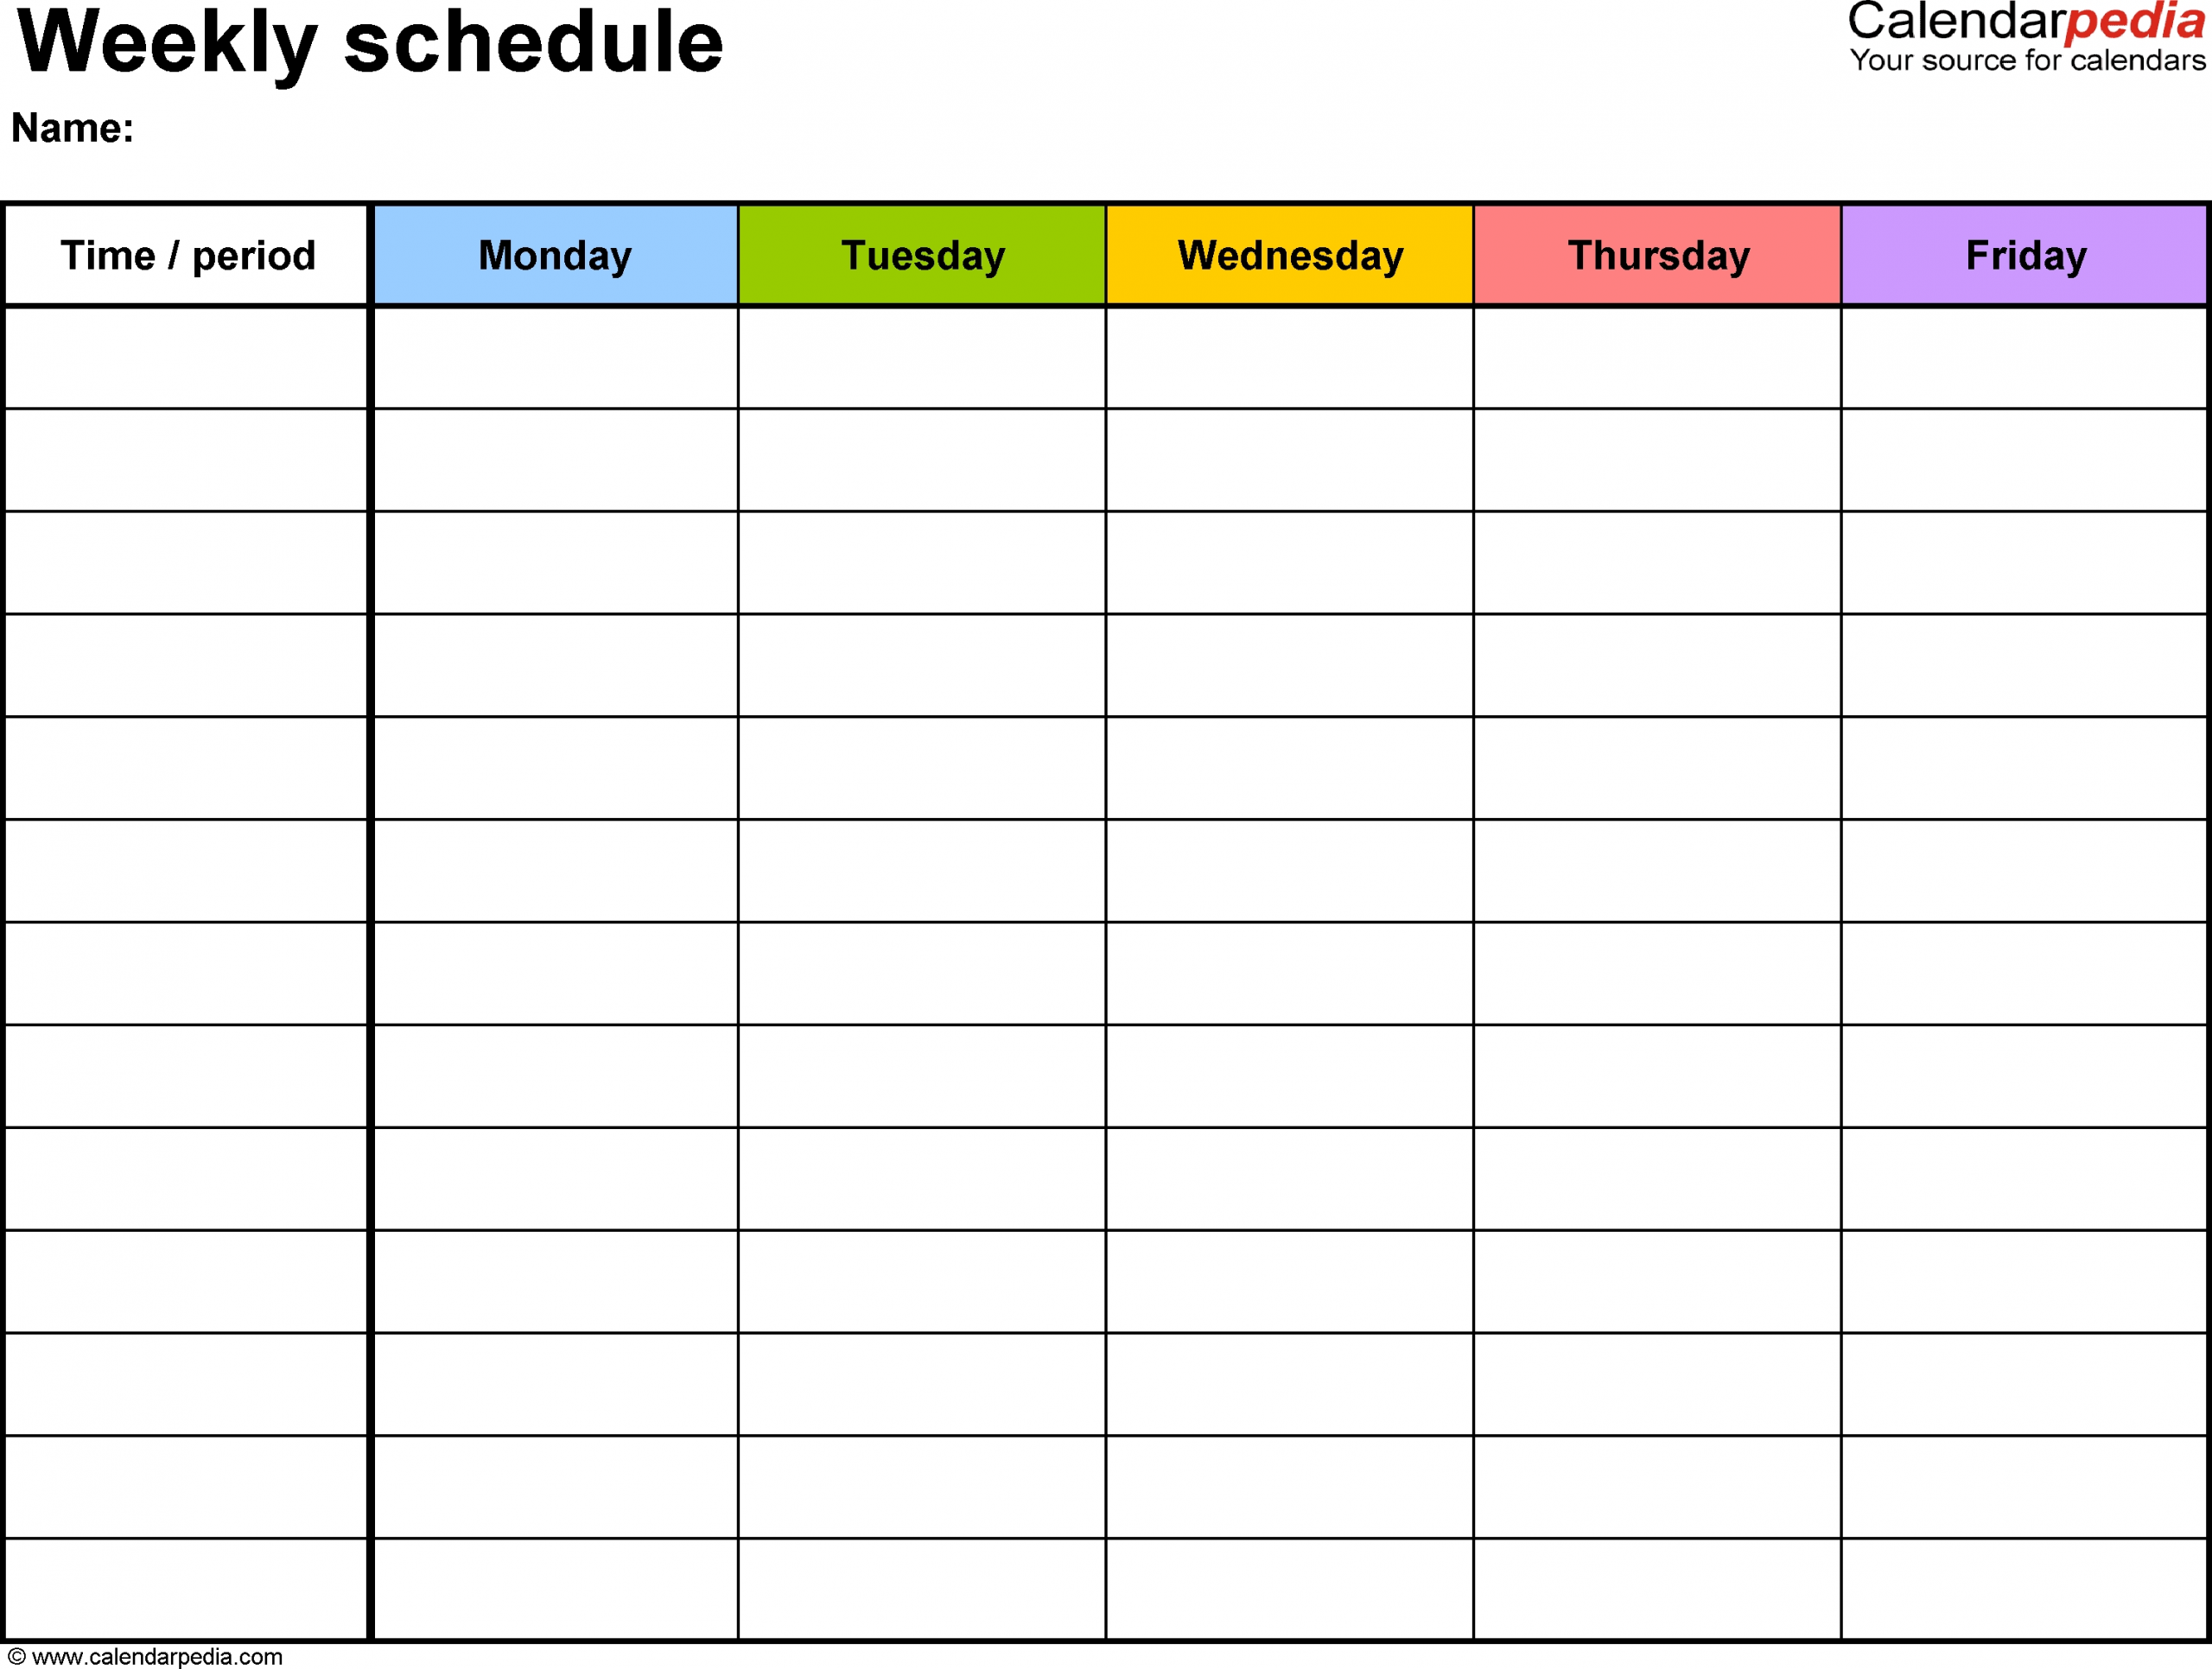 Catch Weekly Schedule Printable